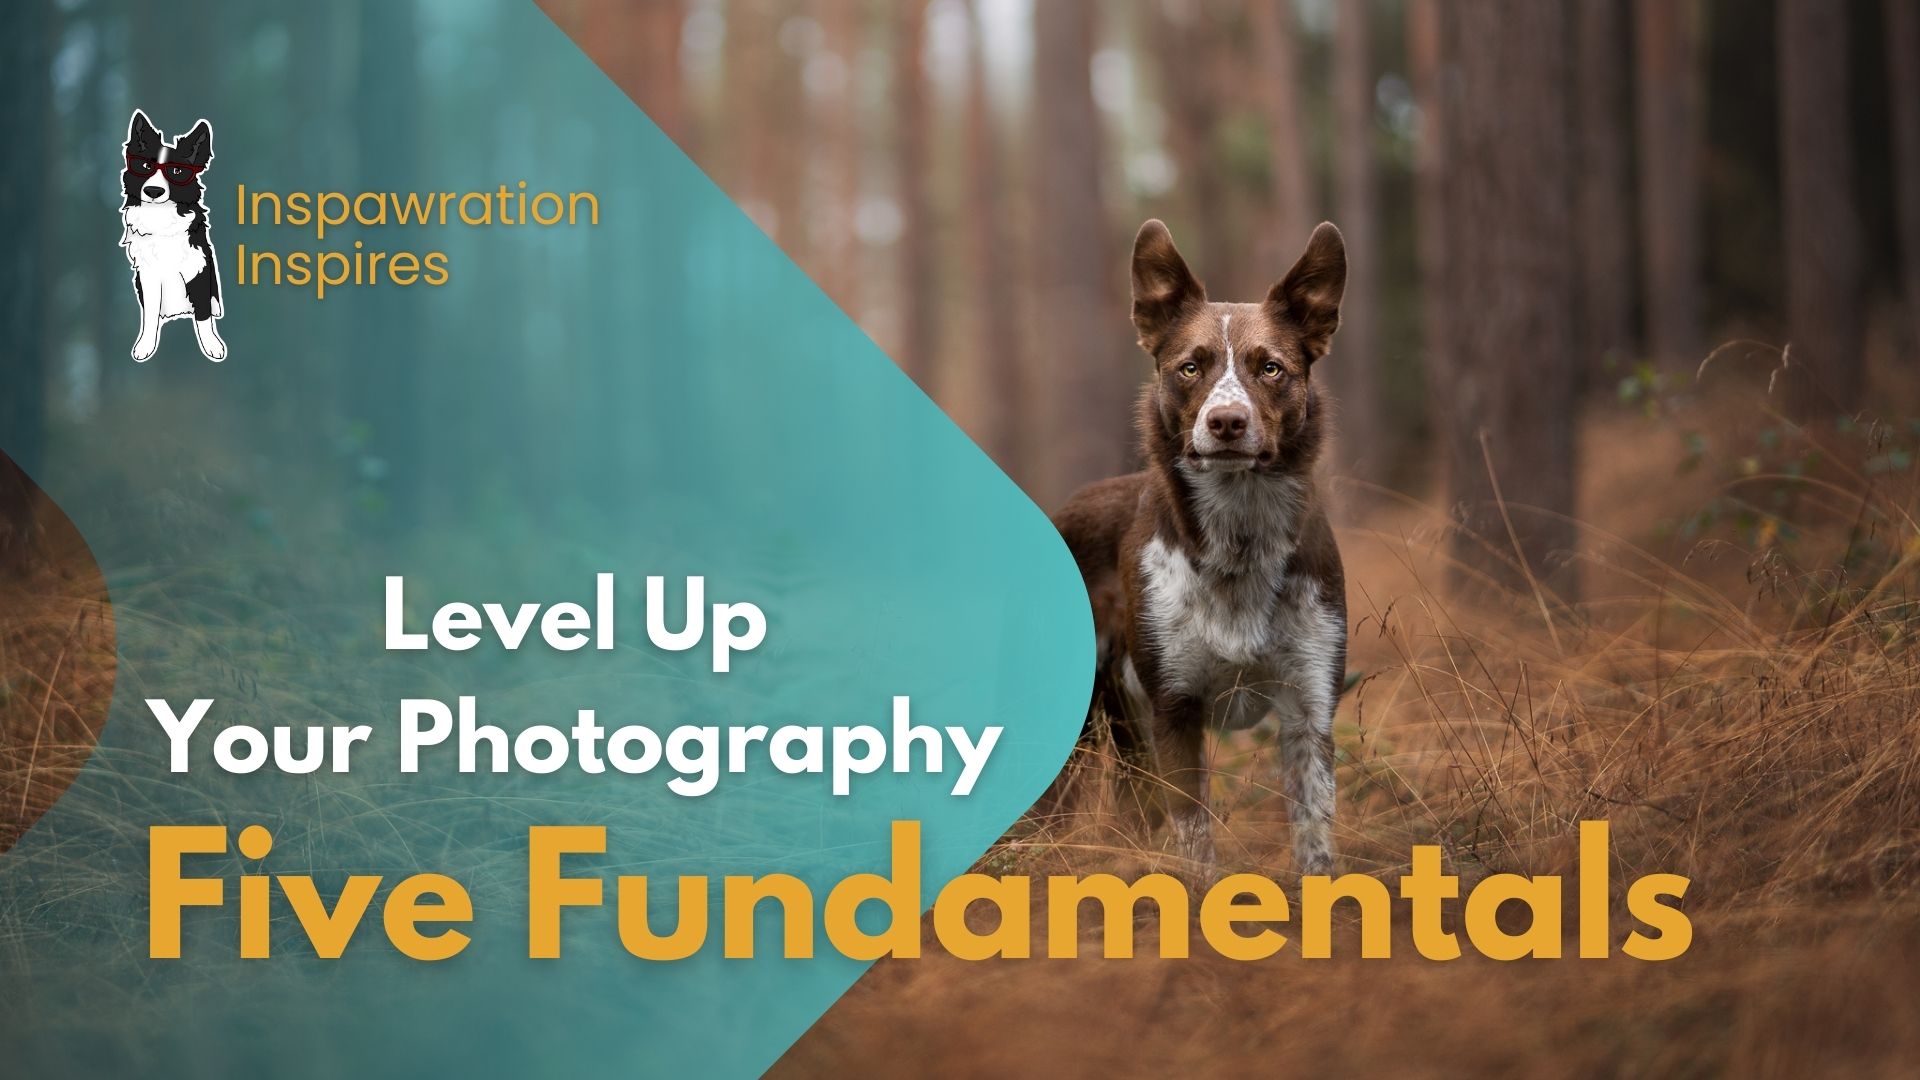 Level Up Your Photography: Five Fundamentals